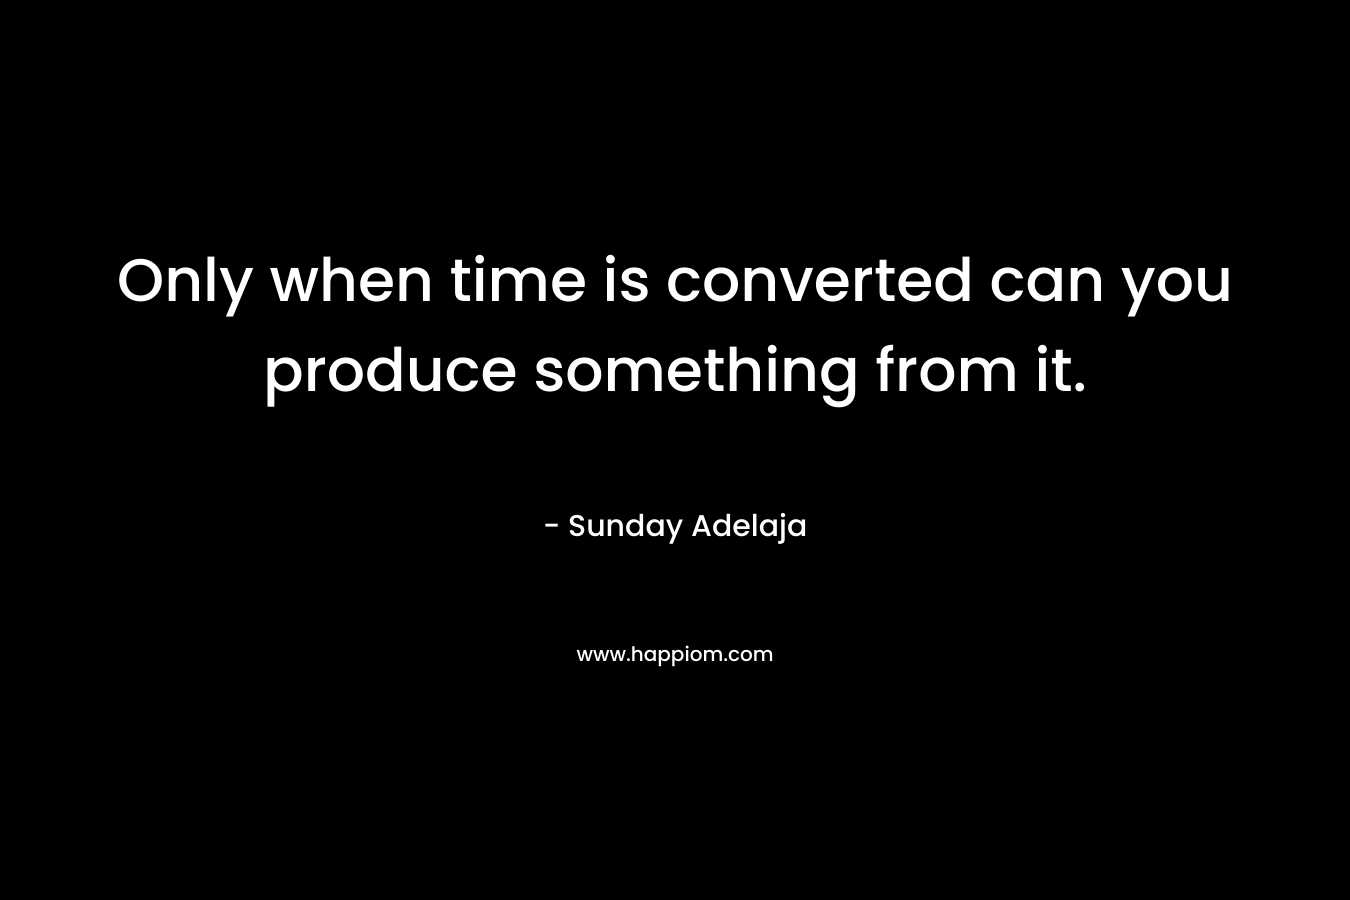 Only when time is converted can you produce something from it.